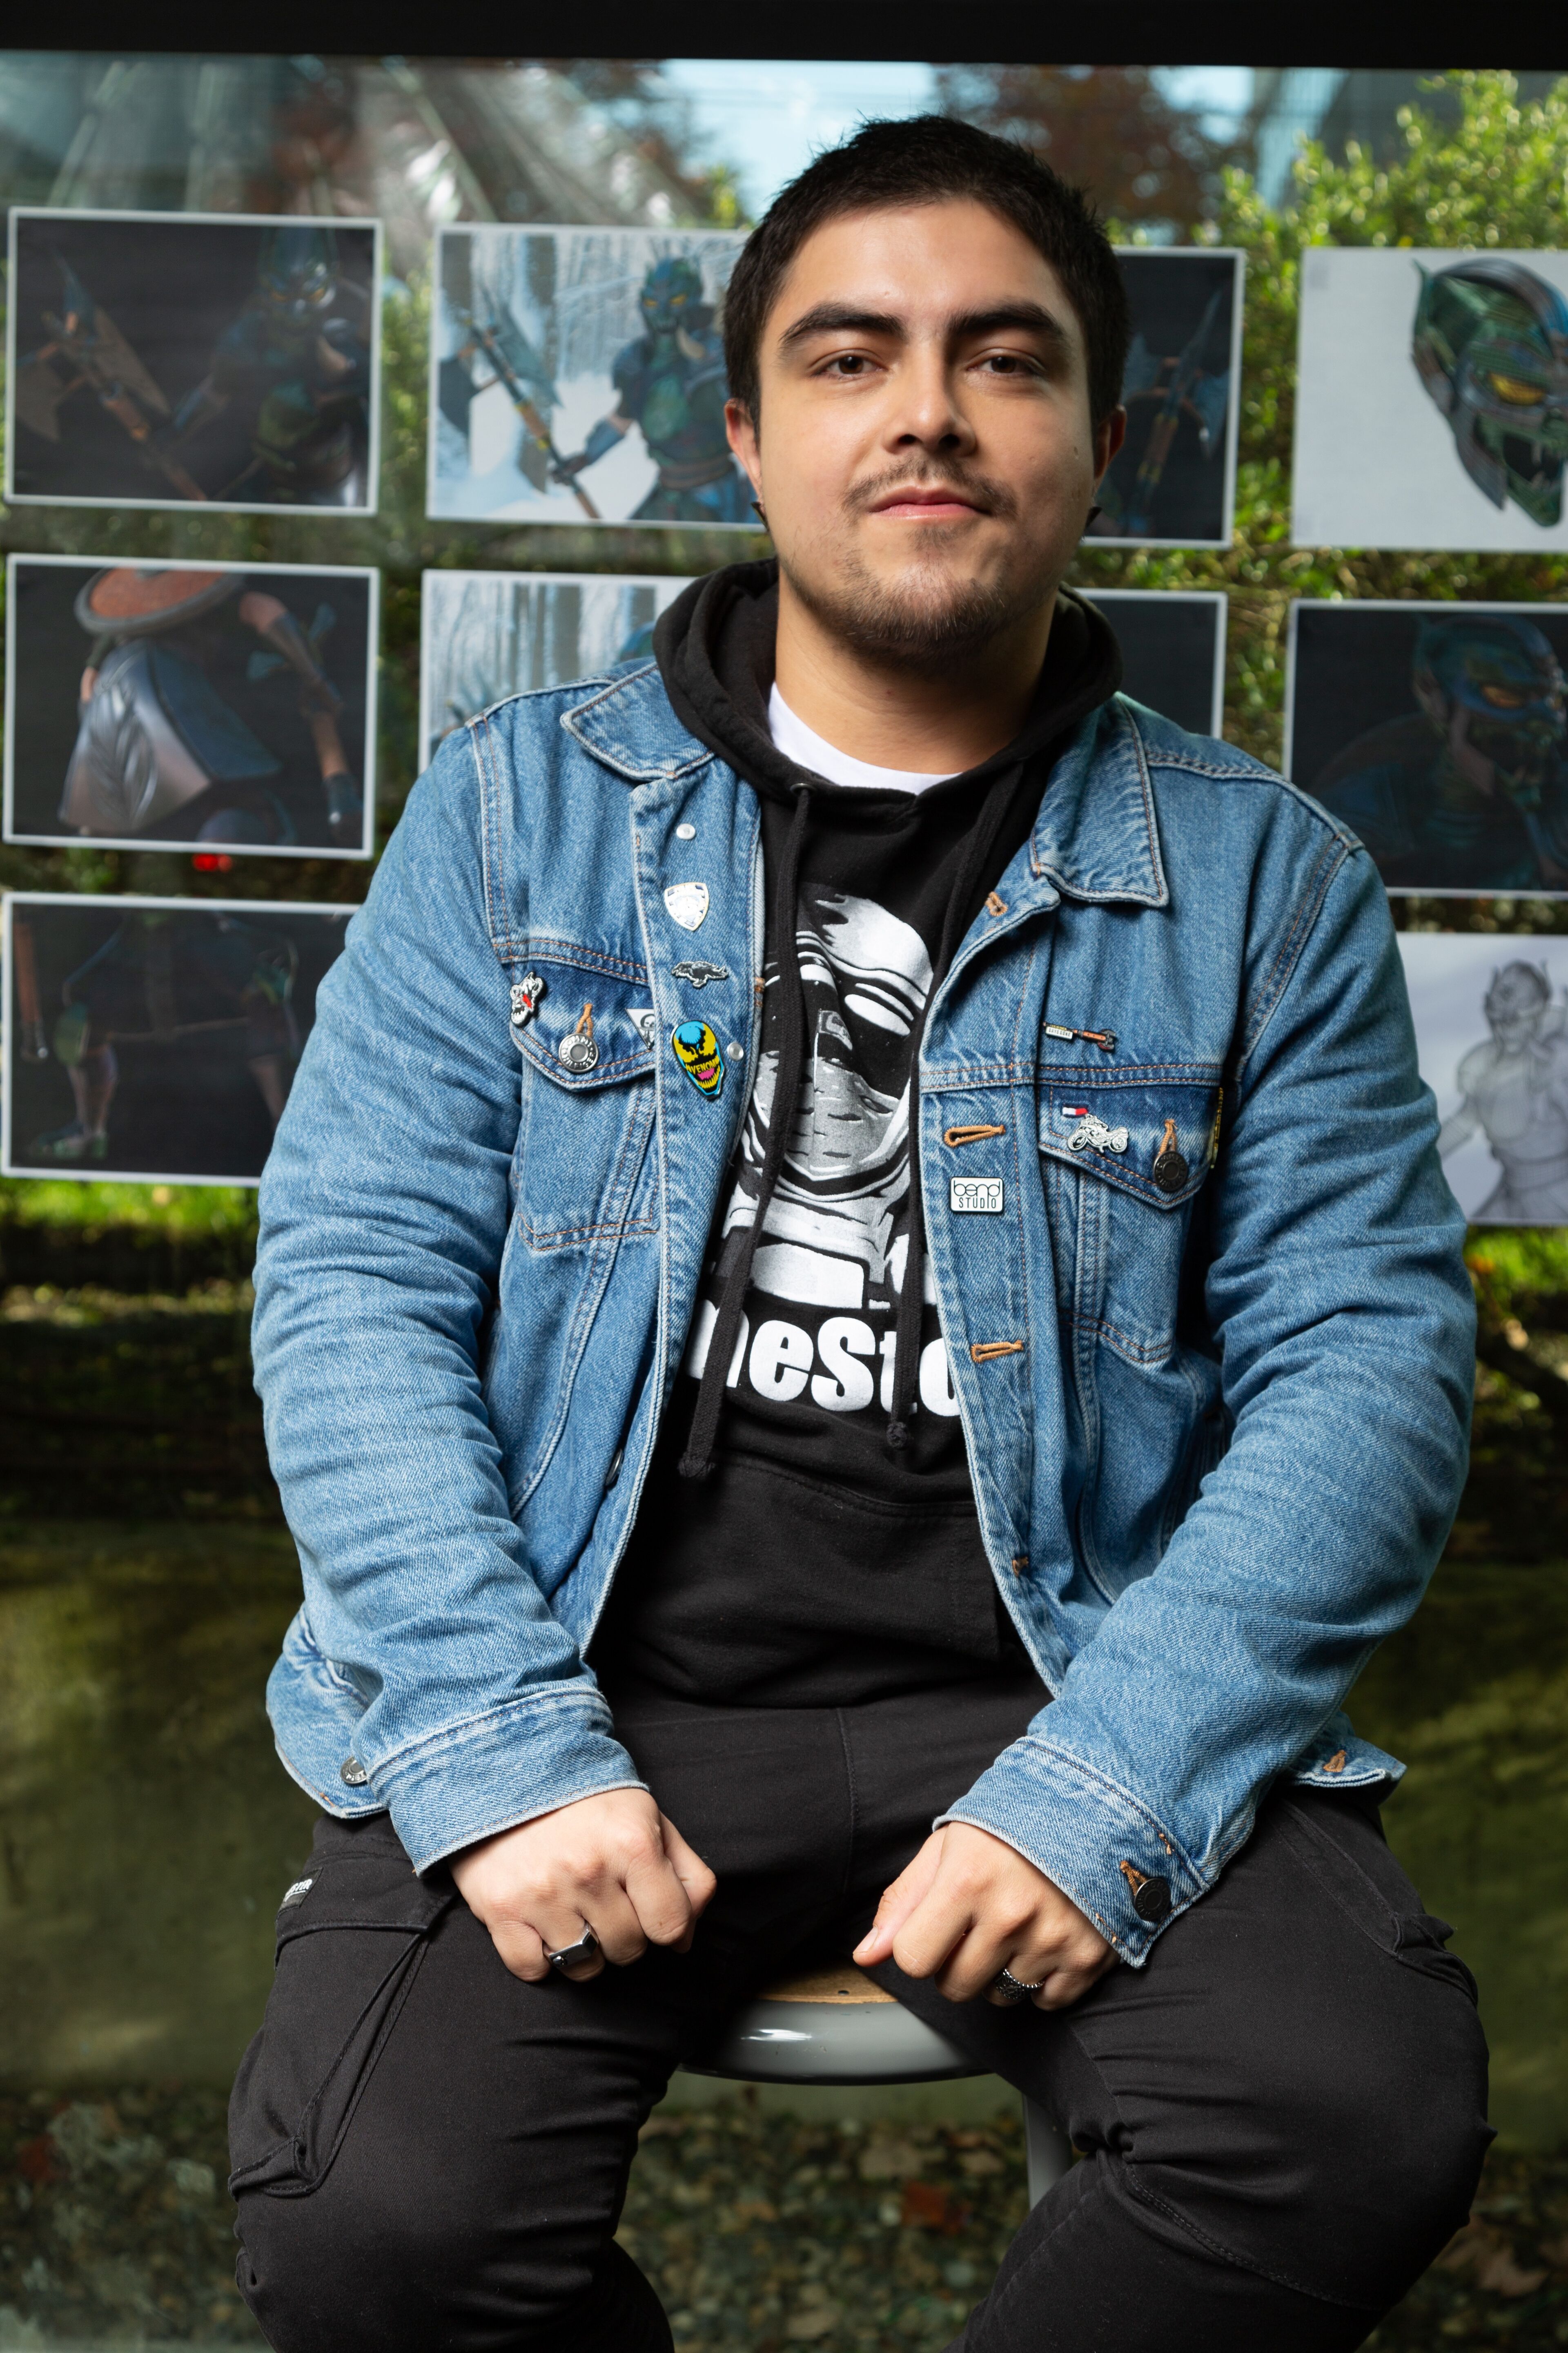 A confident male artist seated before his character sketches, sporting a denim jacket adorned with pins.